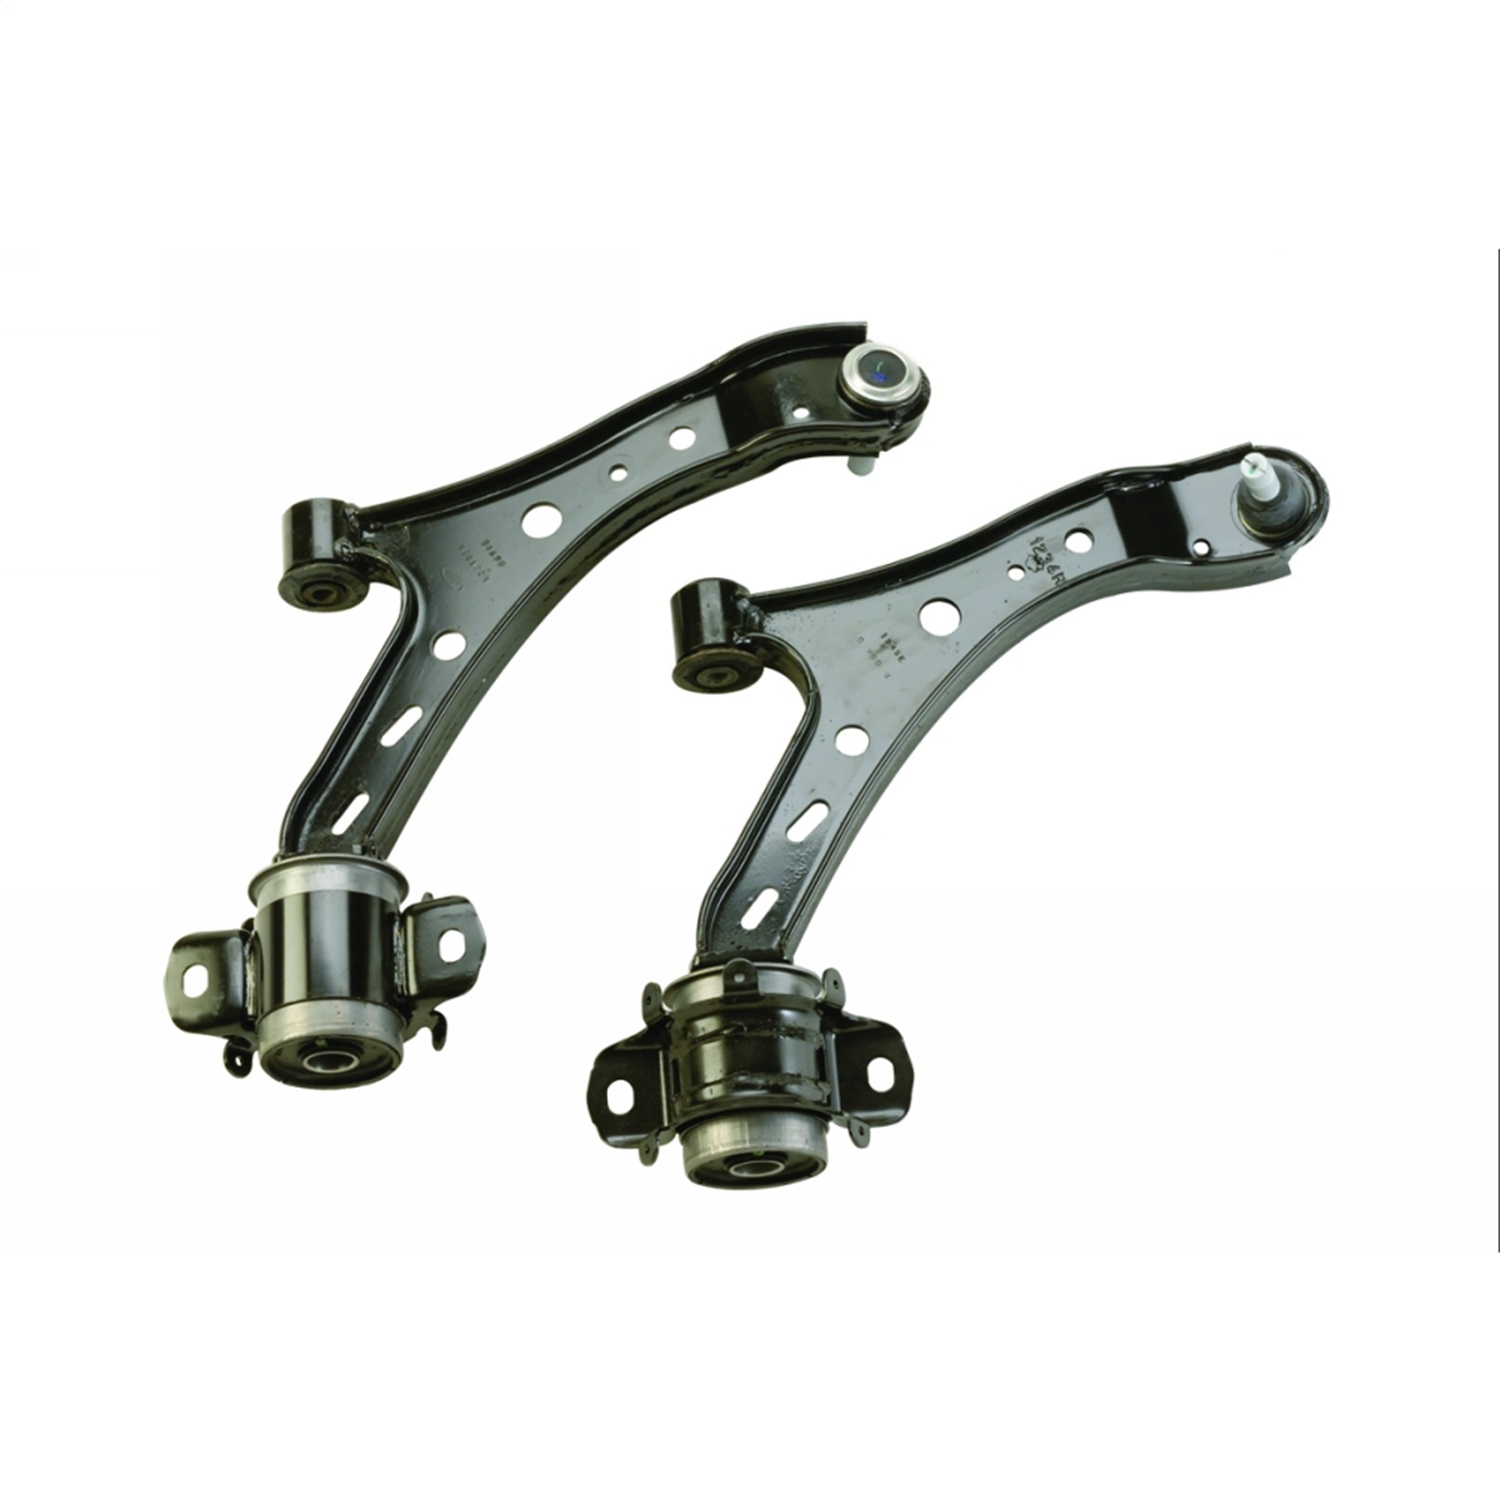 Ford Racing Ford Racing M-3075-E Lower Control Arm Upgrade Kit Fits 05-10 Mustang